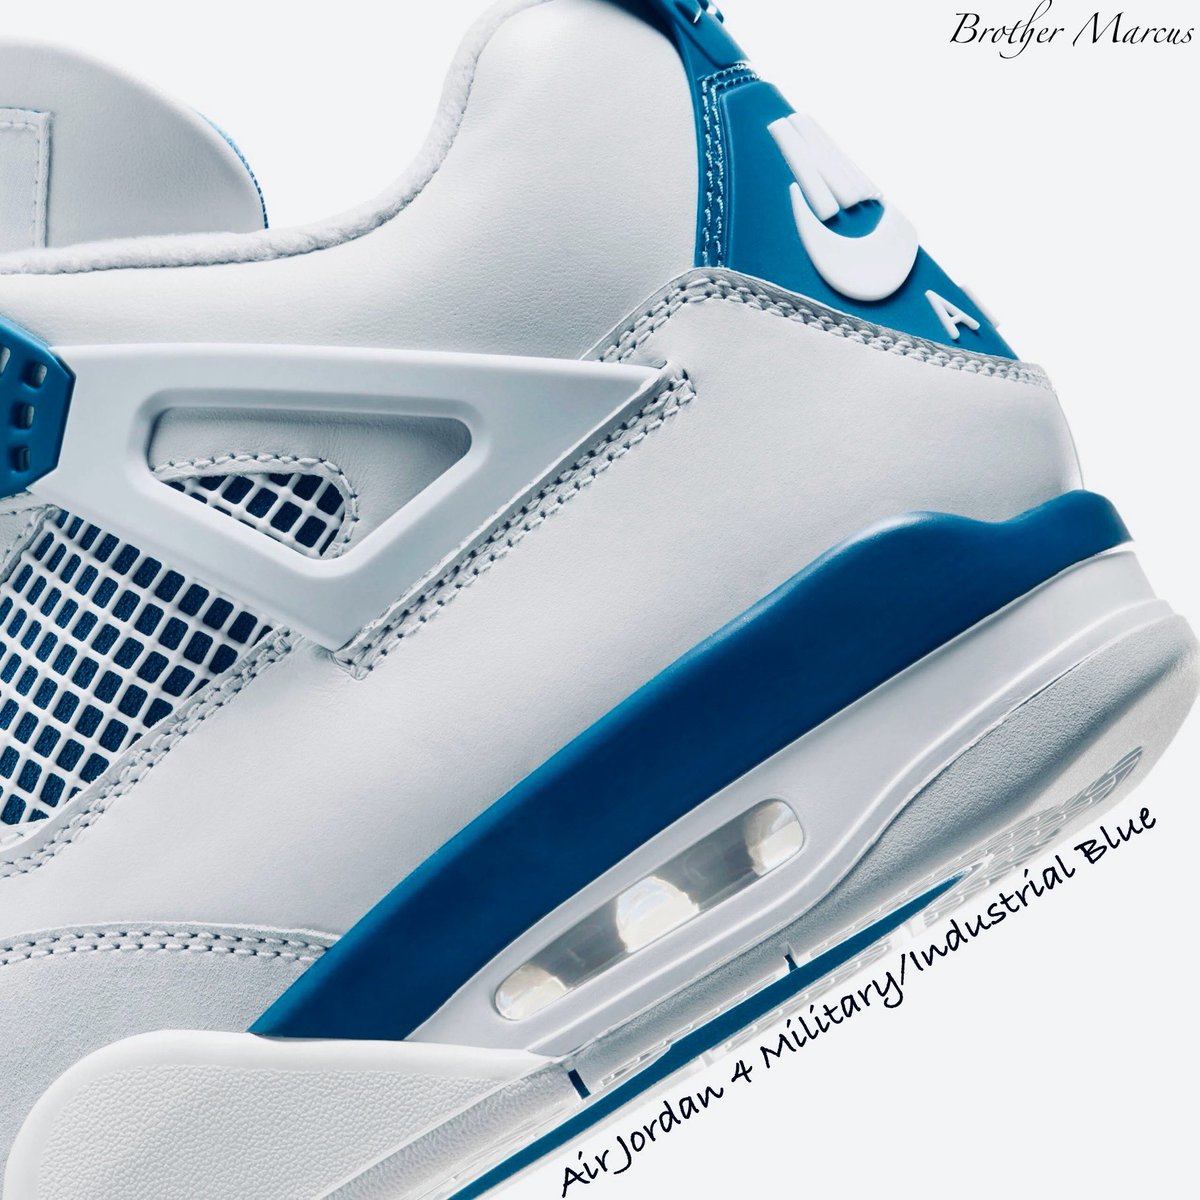 Check out the new video of the Shock Drop release of the Air Jordan 4 military blue! #aj4 #jordan4militaryblue #jordan4industrialblue #jordan4 #airjordan4 

youtu.be/6riRFhlb-9w?si…